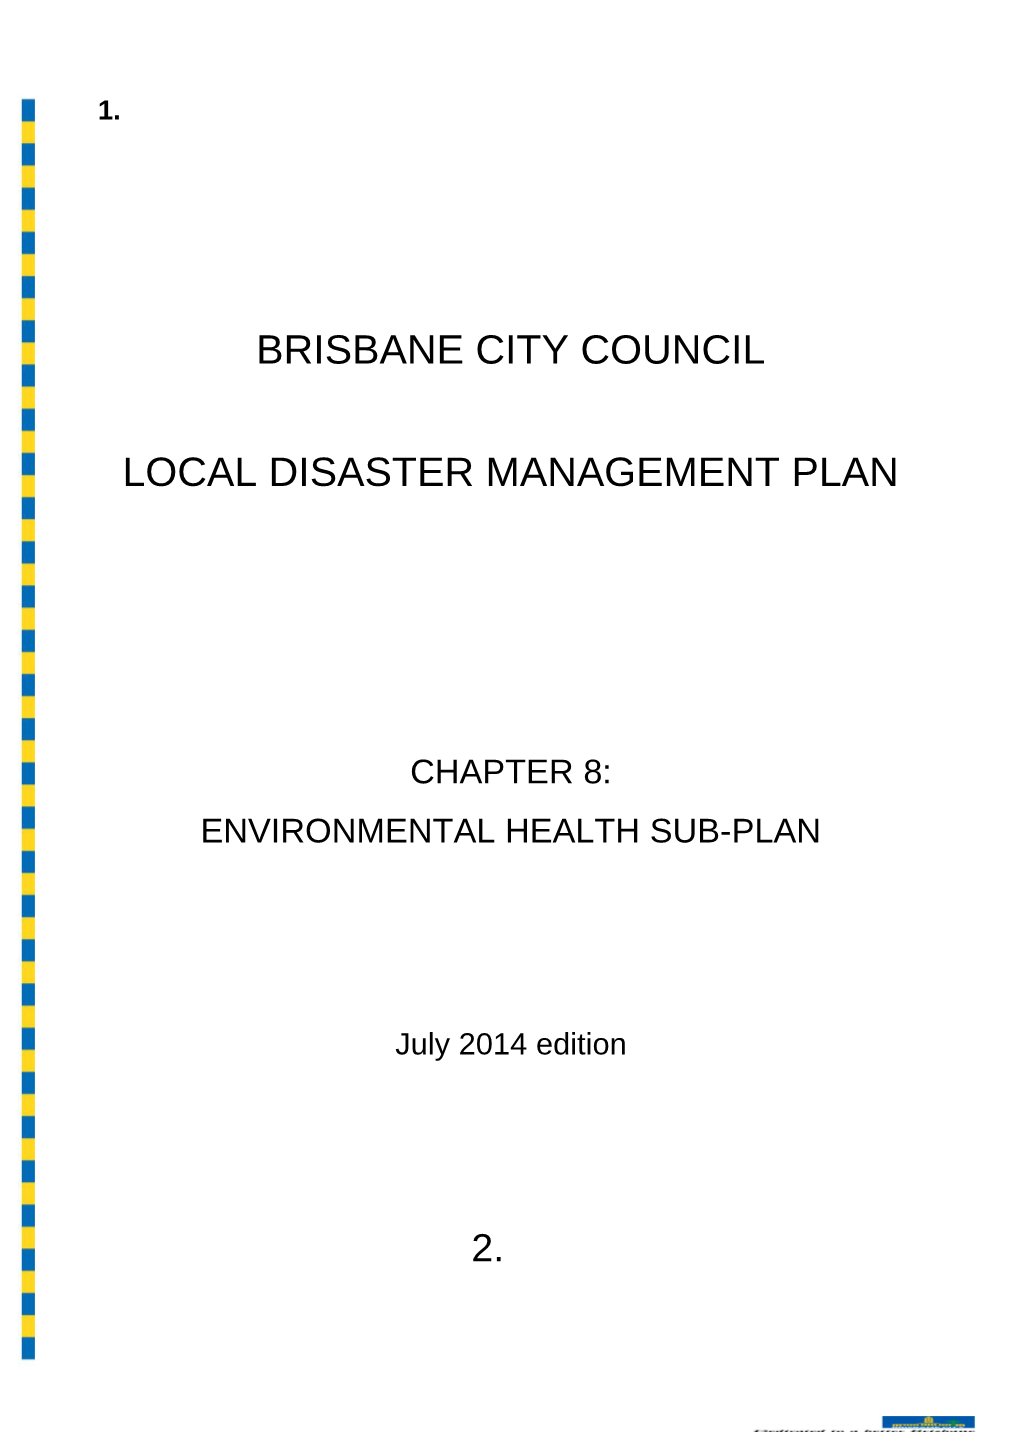 BCC Disaster Management Plan Section 2